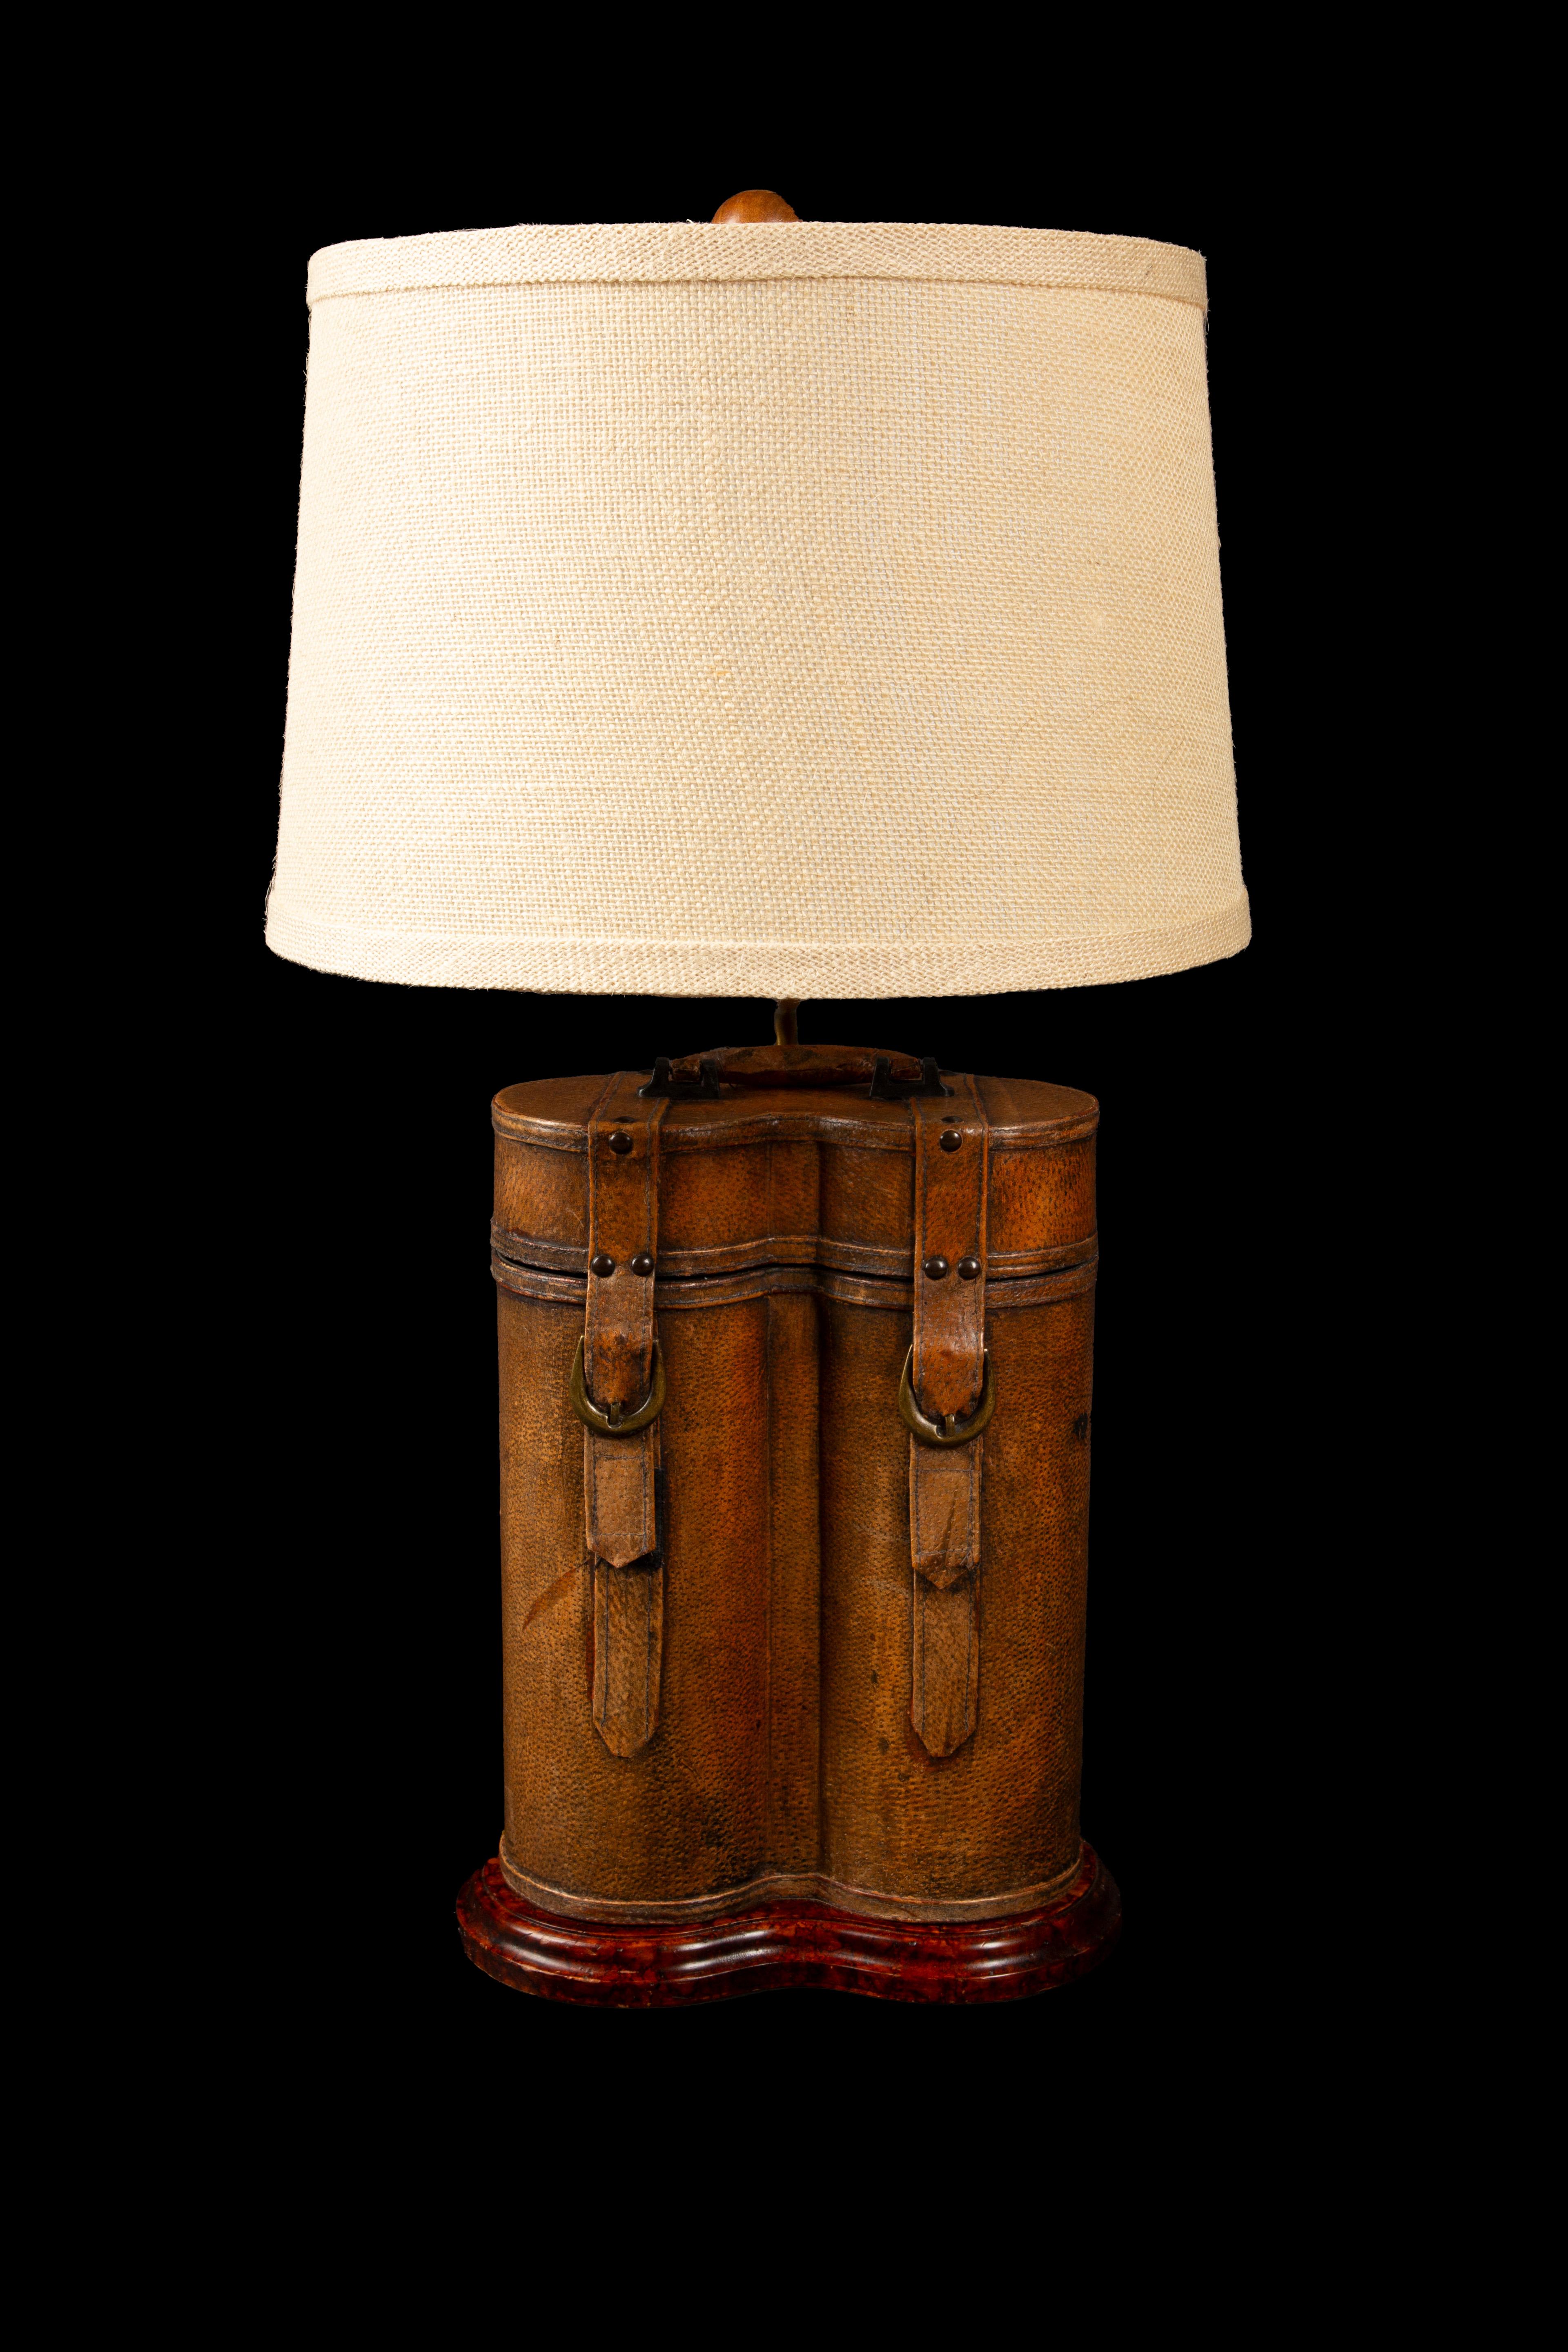 This exquisite 19th-century antique leather double bottle wine holder has been ingeniously repurposed and transformed into a stunning lamp, seamlessly blending history and functionality. Crafted with meticulous attention to detail, the rich patina